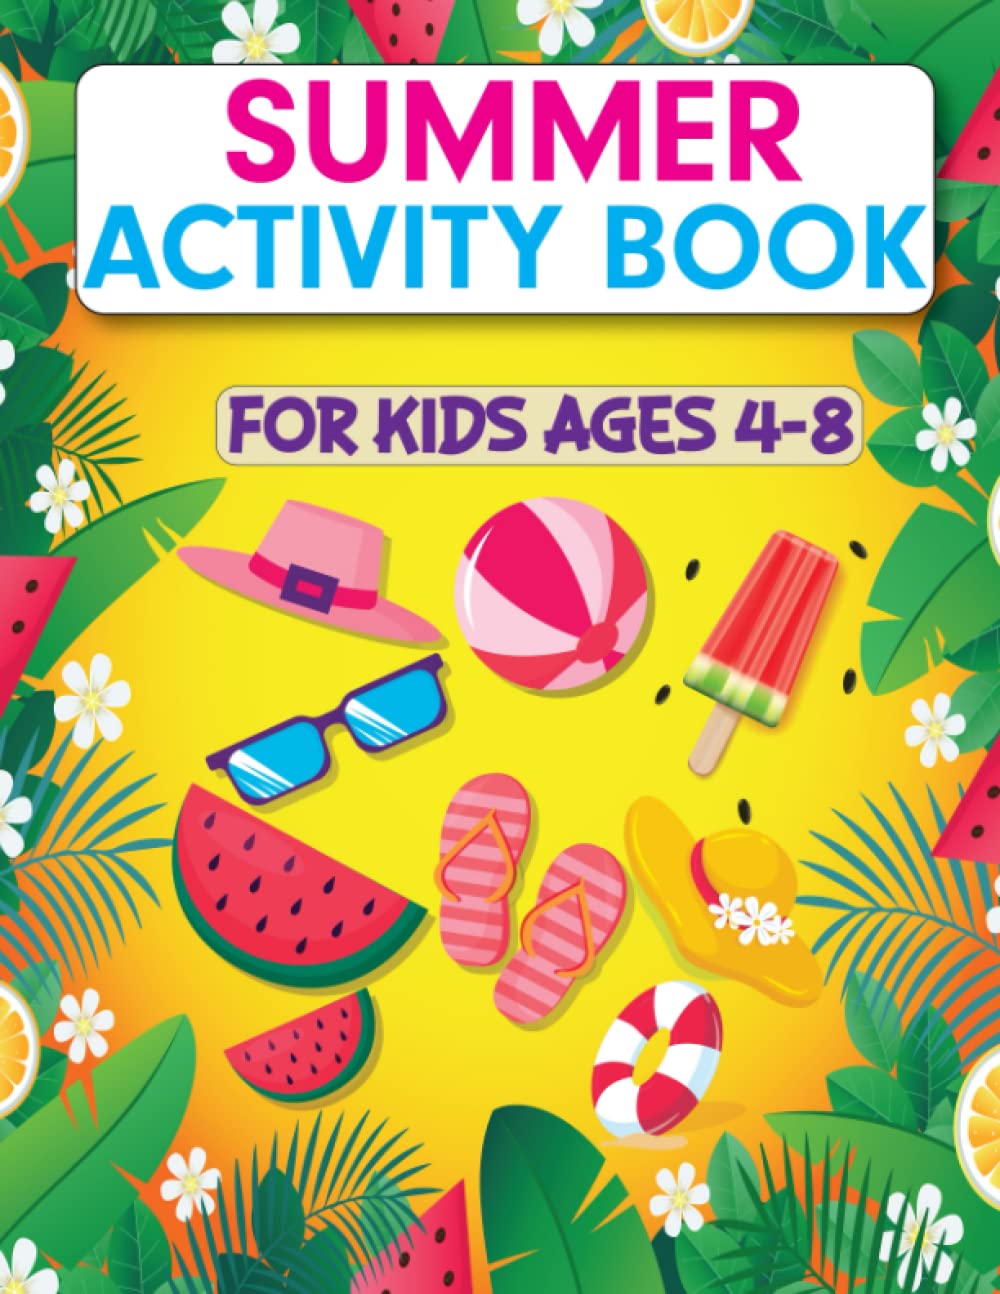 Summer Activity Book for Kids Age 4-8 (Dot to Dot, Coloring, Mazes, Spot the Difference, Word Search, and Count & Number Tracing Activity)